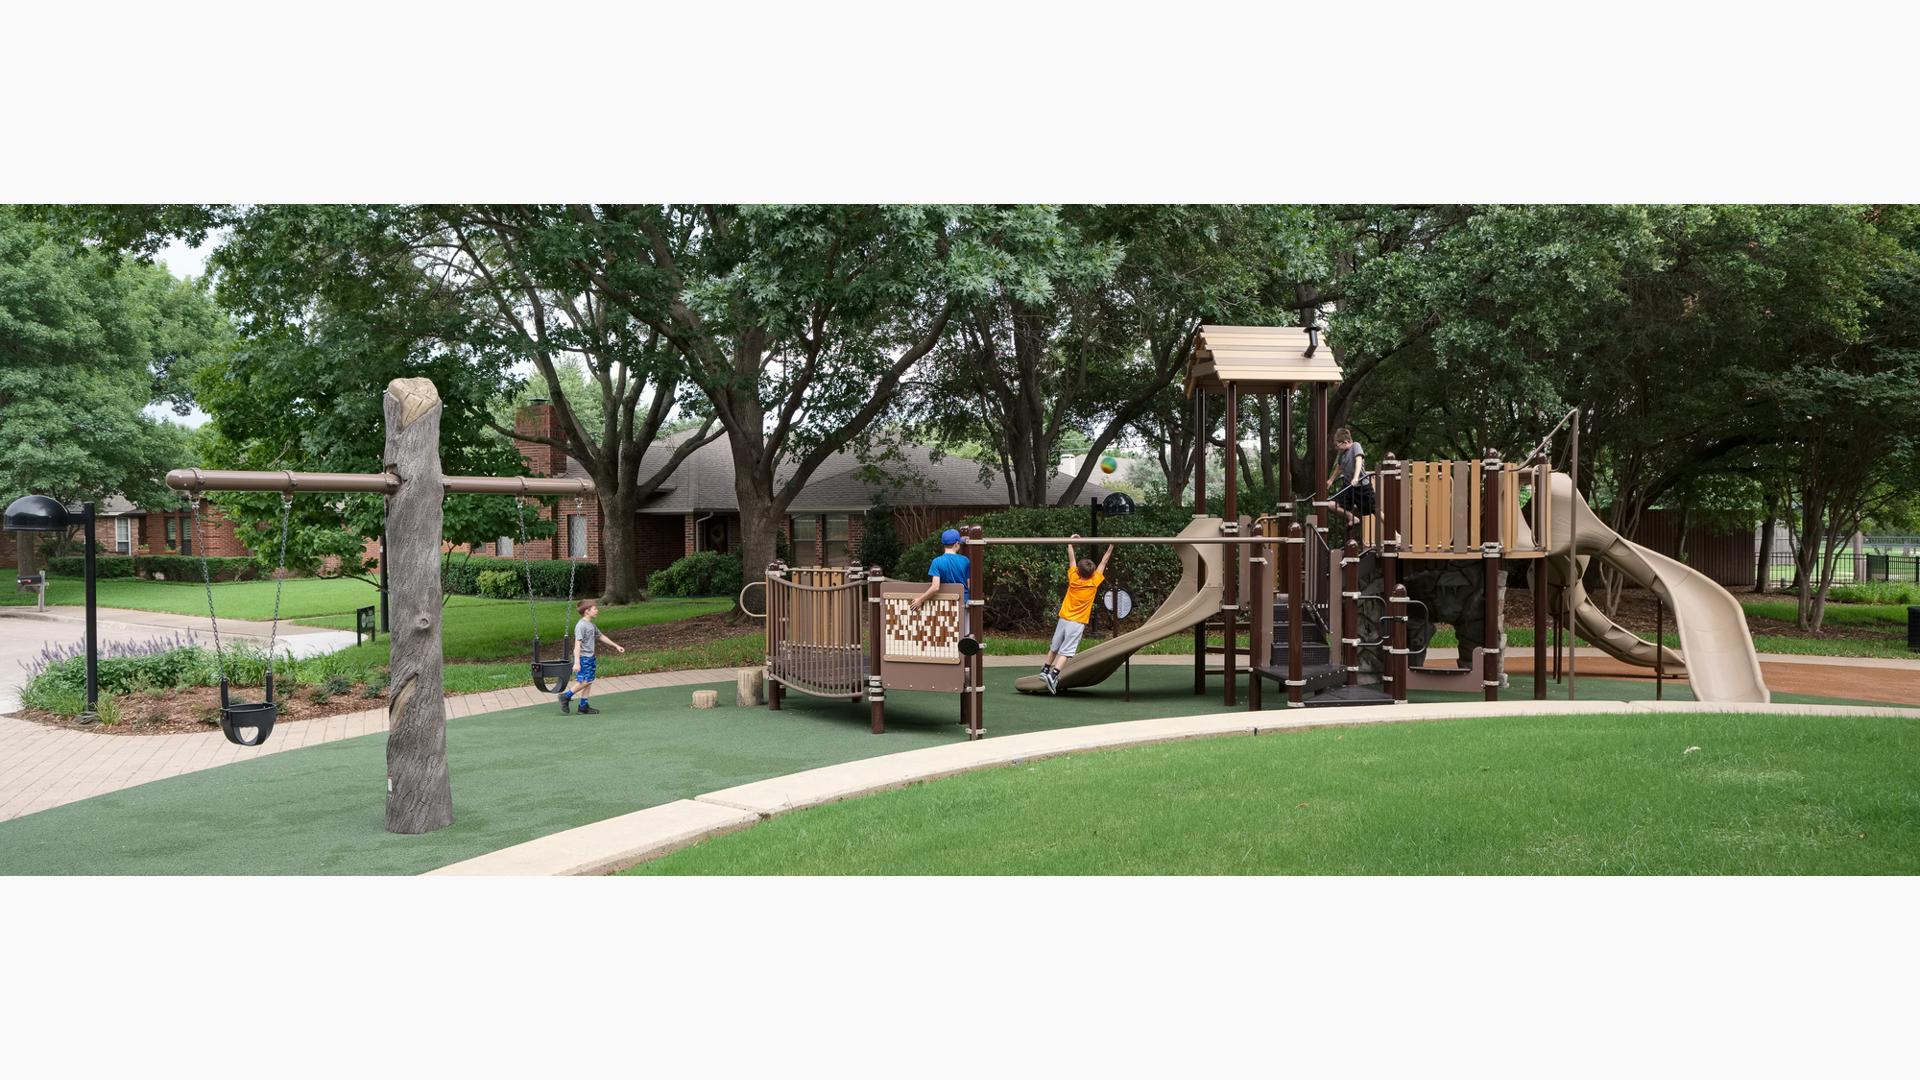 Dome Park Addison, TX features the Canyon Collection® rock climbers